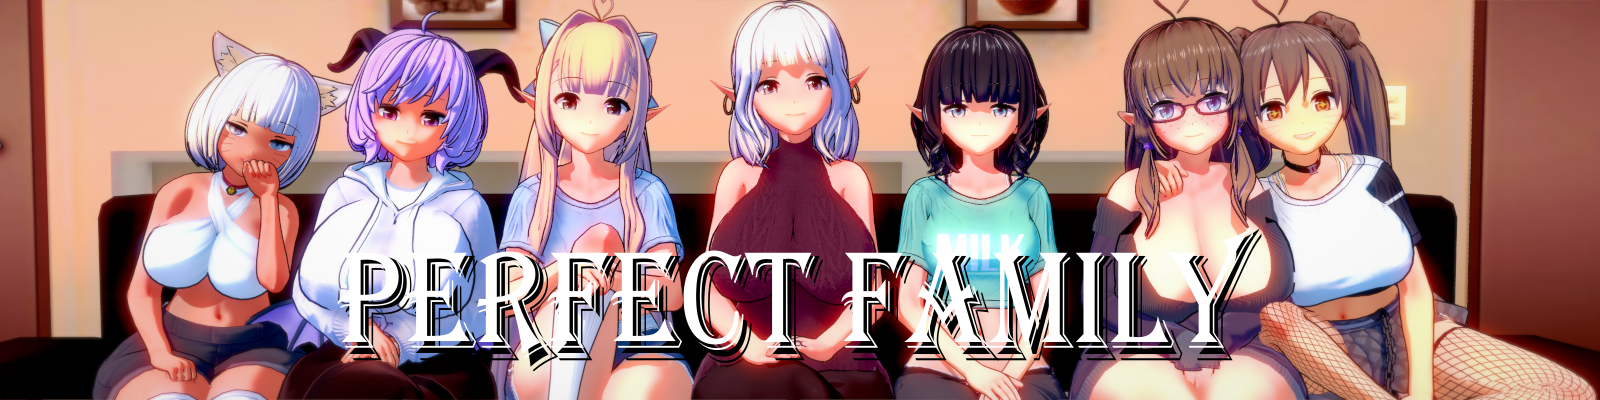 The Perfect Family Picture Porn - Download Free Hentai Game Porn Games Perfect Family (ver Update3.1)